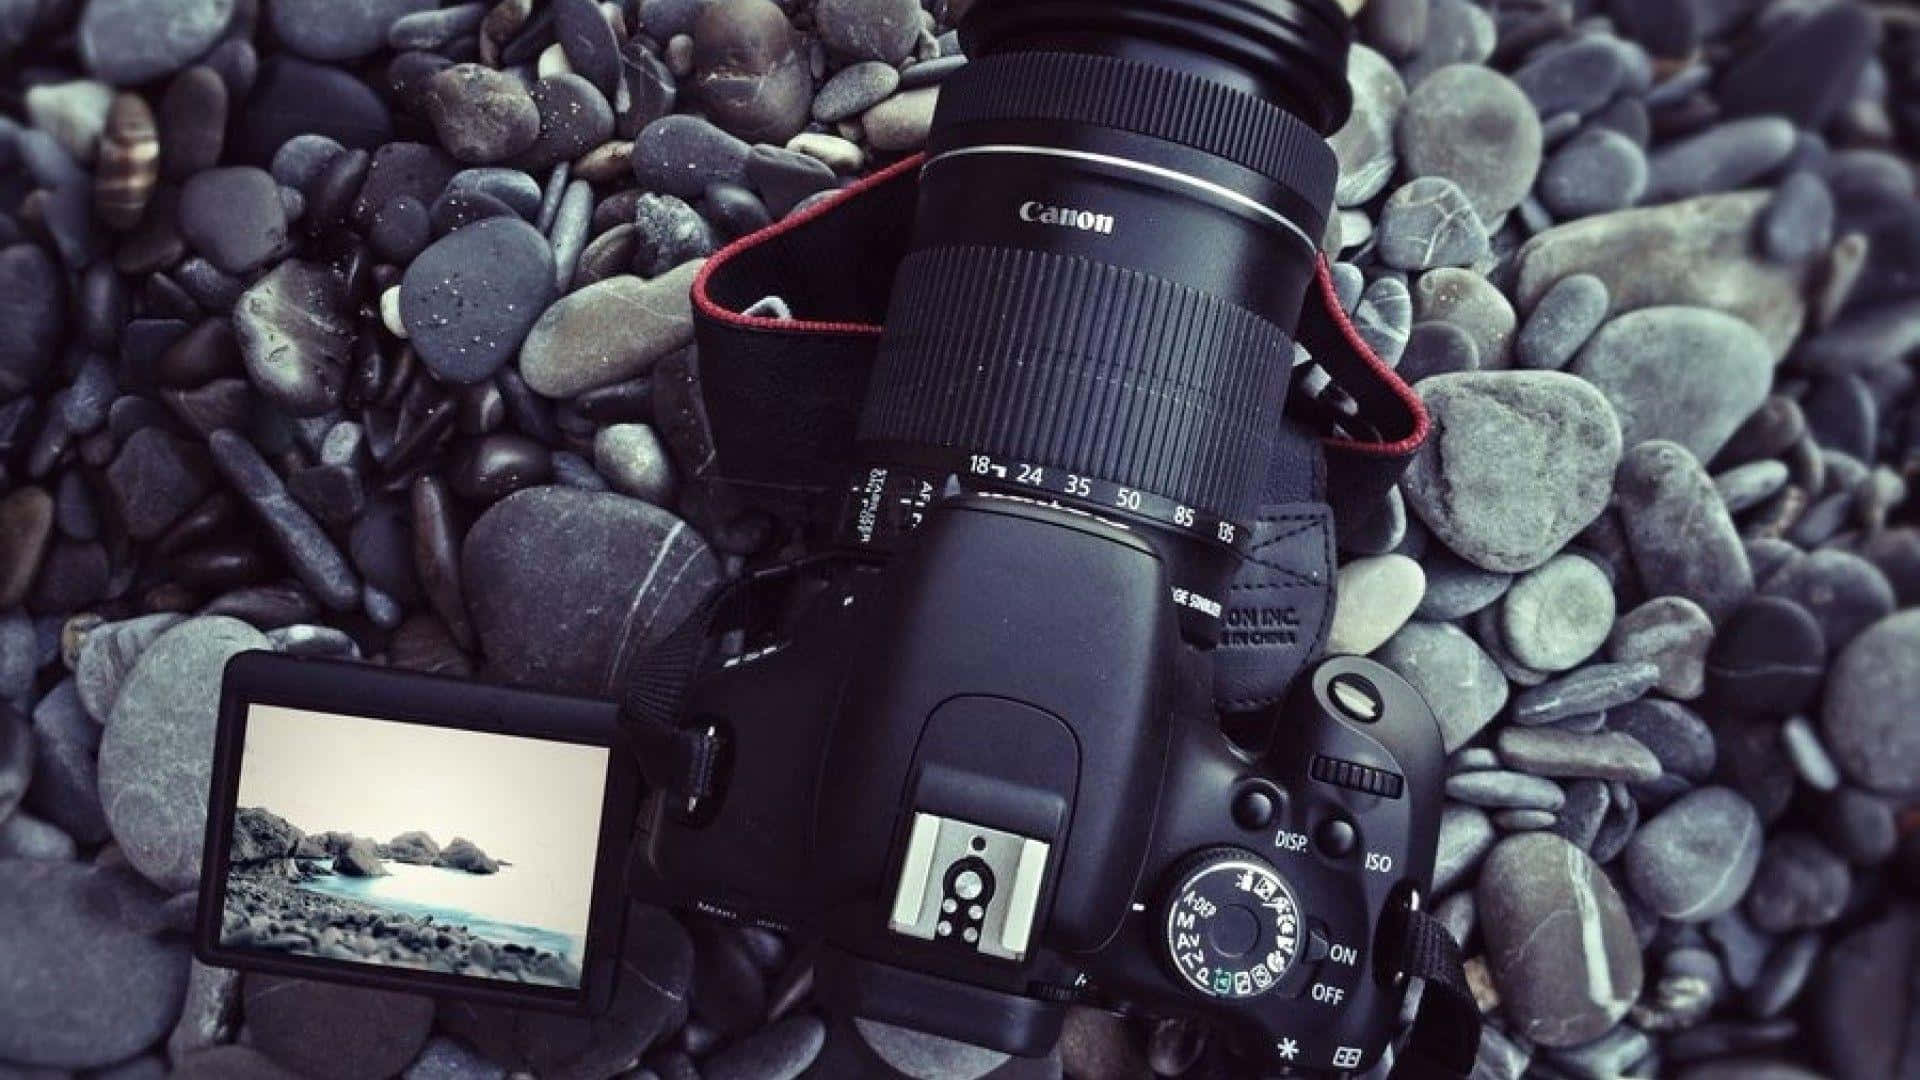 Capturing Perfect Moments with a DSLR Camera